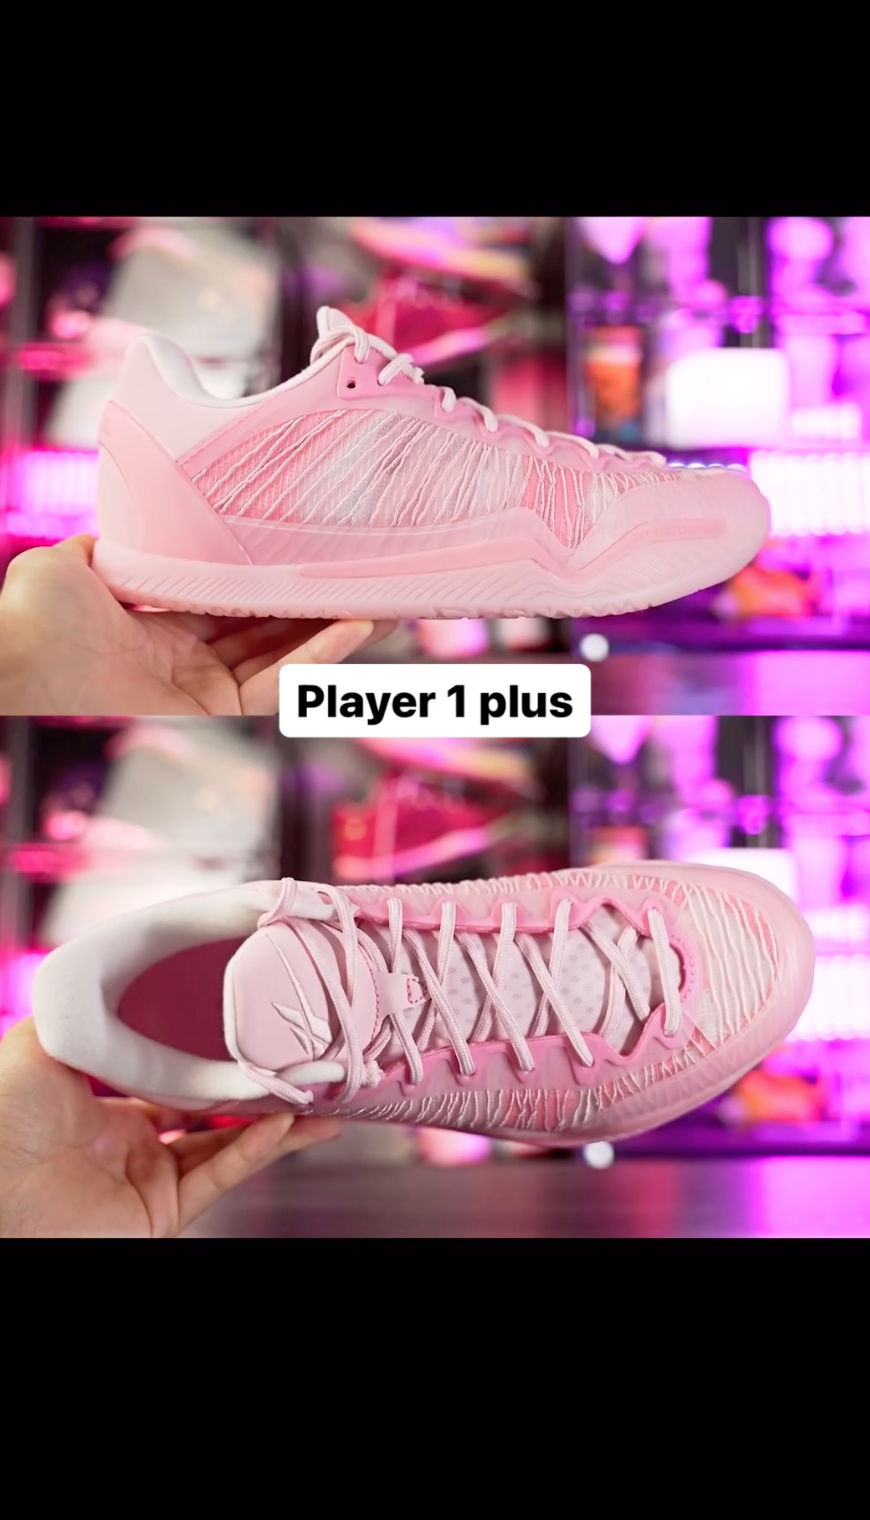 Player1 Plus Super Light Low Top Basketball Shoes – Serious Player 